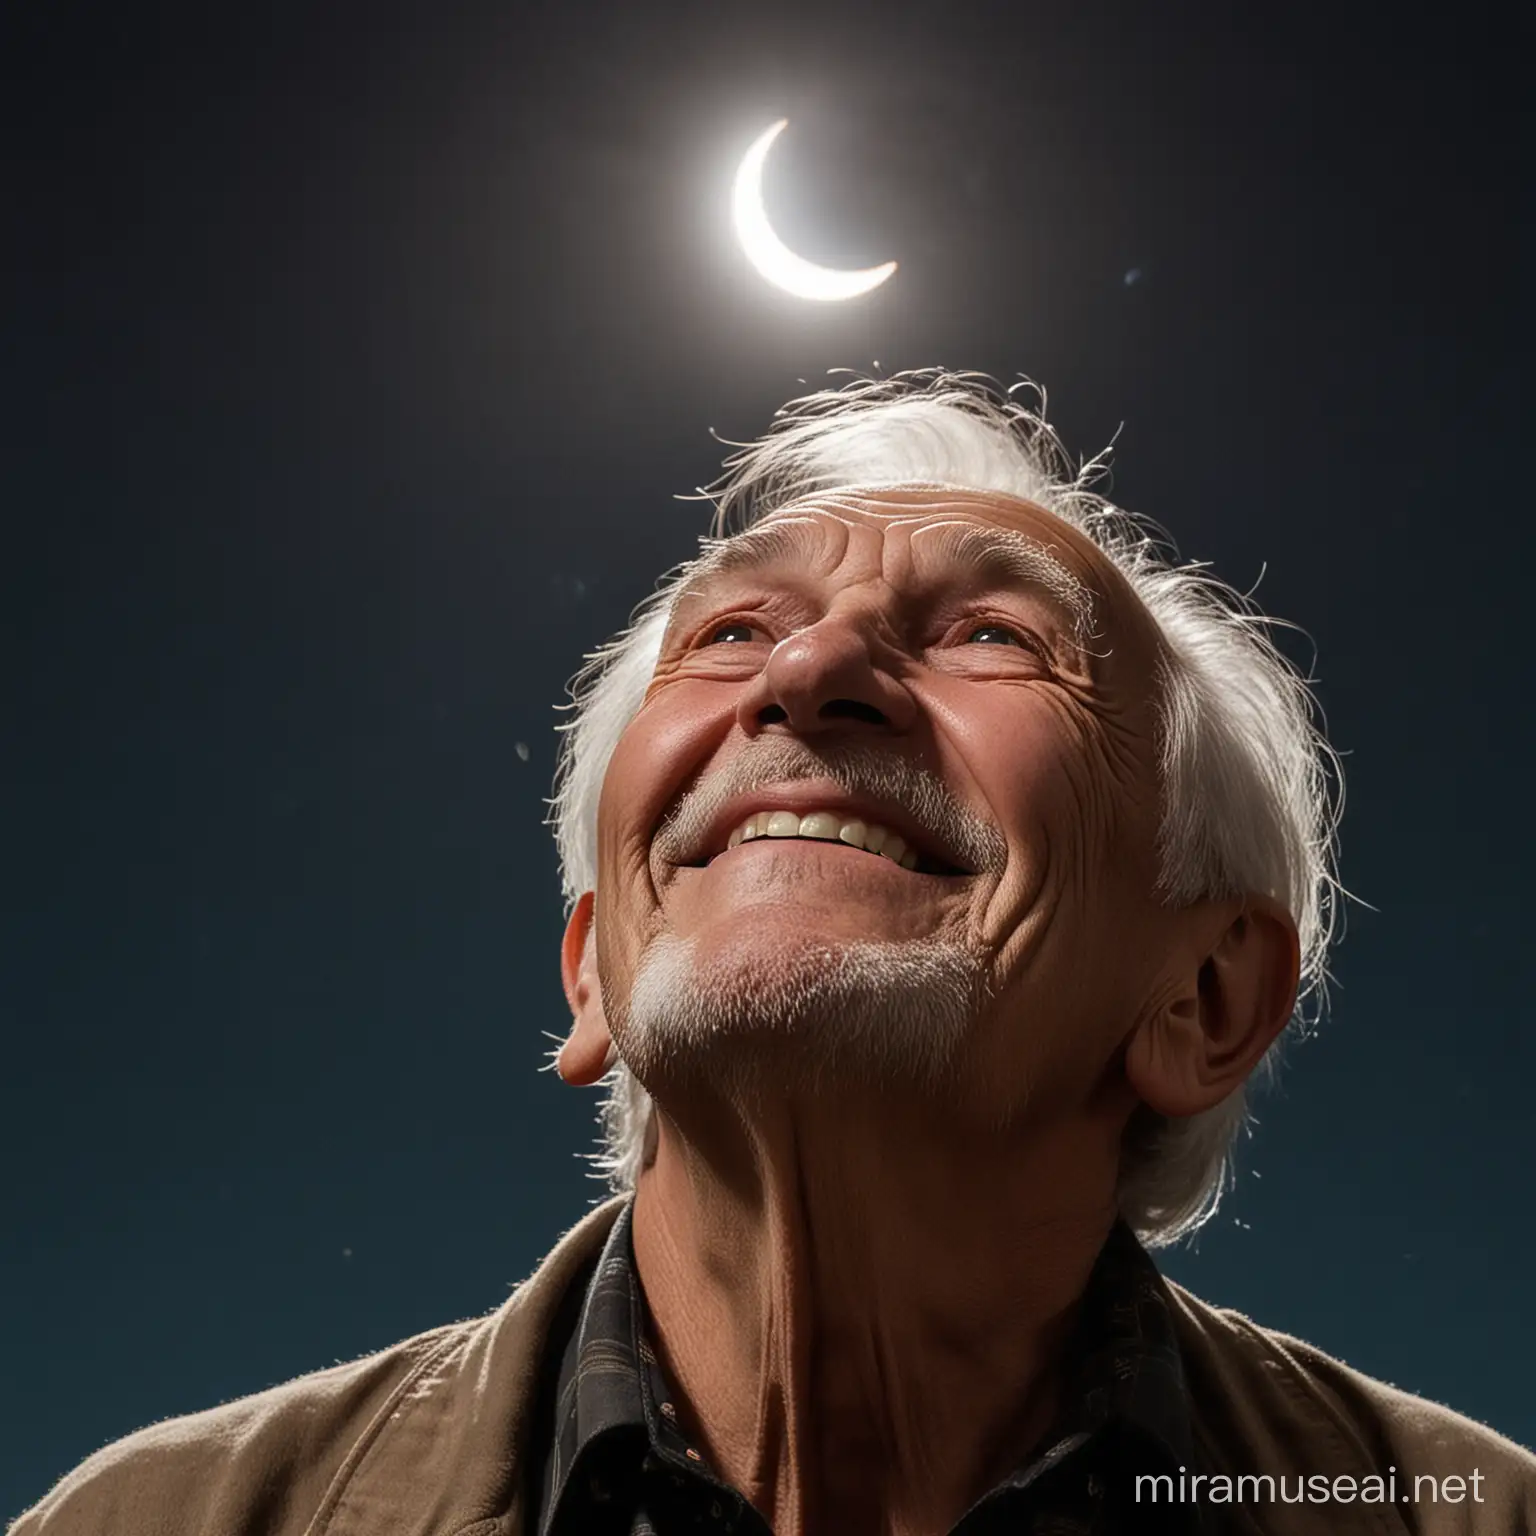 Old man smiling looking up during an eclipse at night